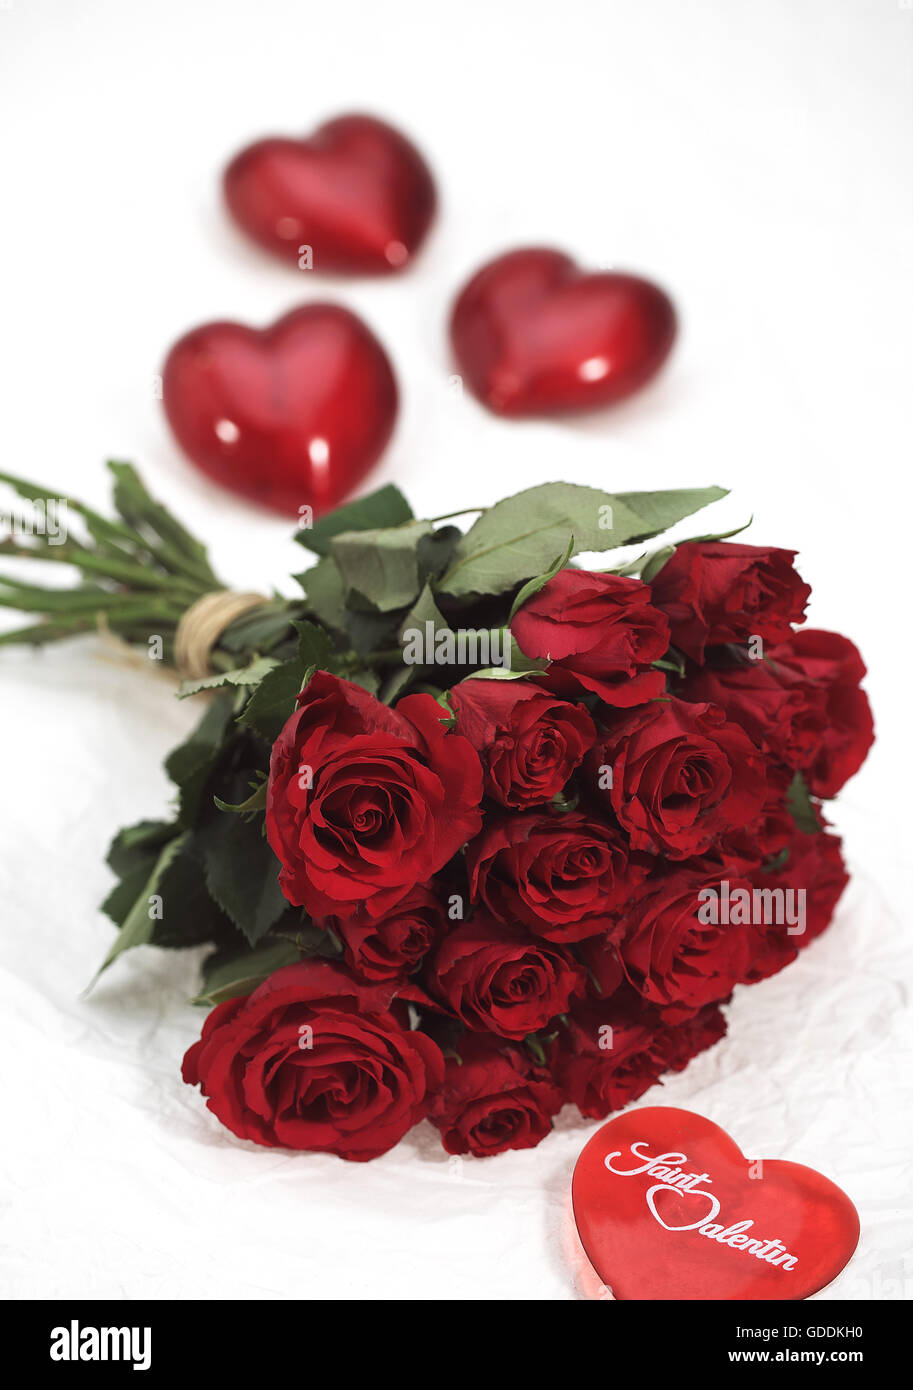 RED ROSES FOR SAINT VALENTINE'S DAY Stock Photo